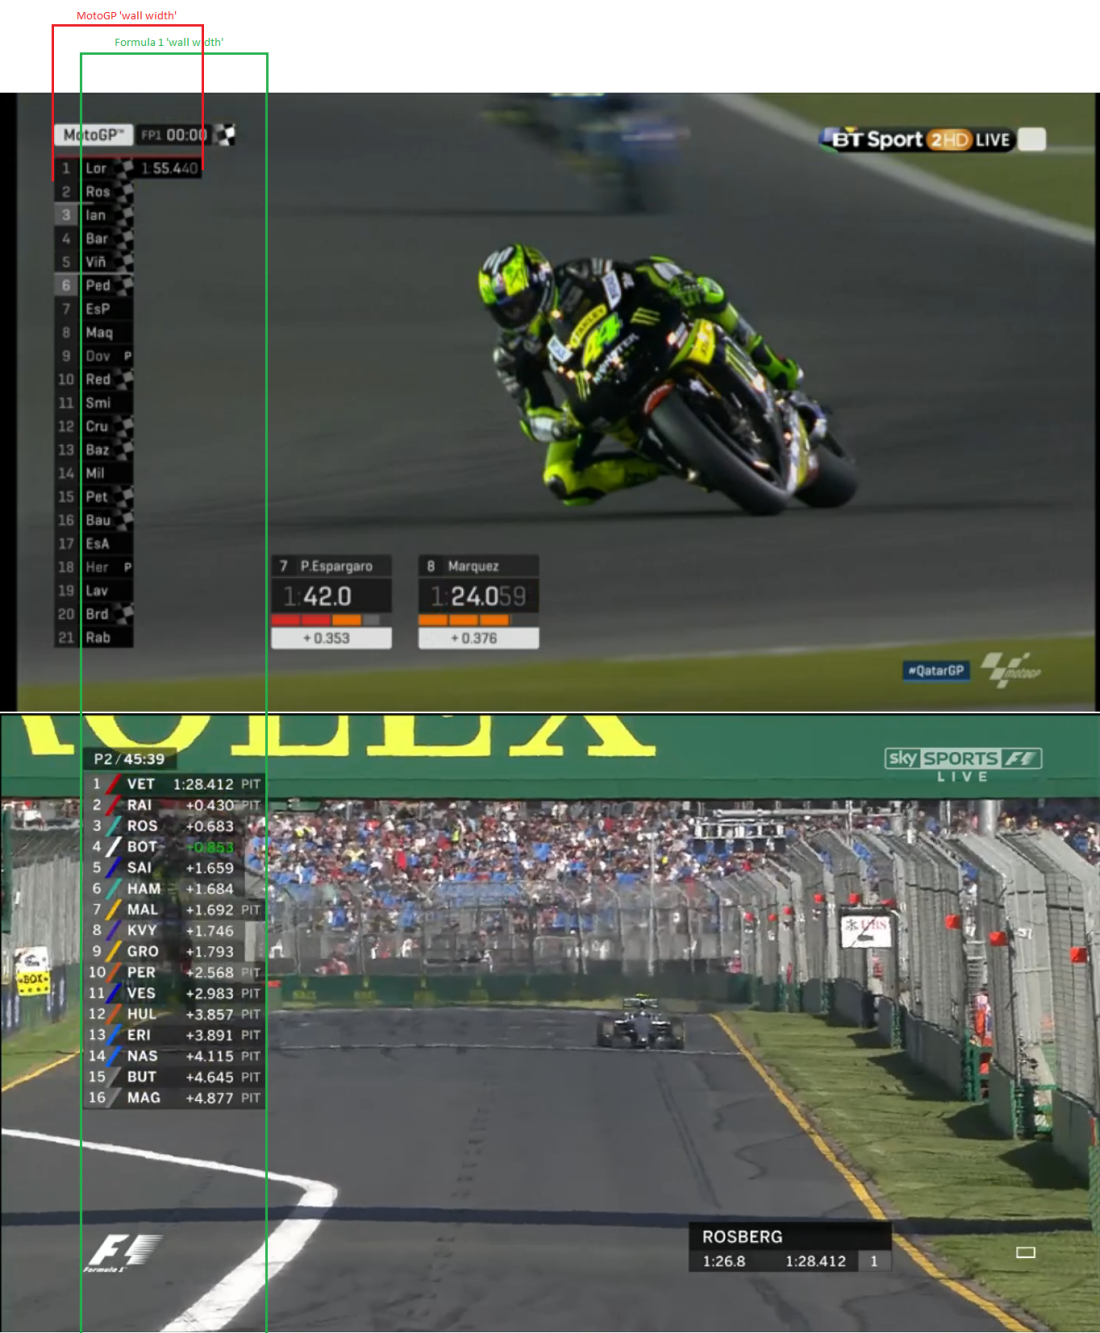 Comparing the timing 'wall width' for Formula 1 and MotoGP.